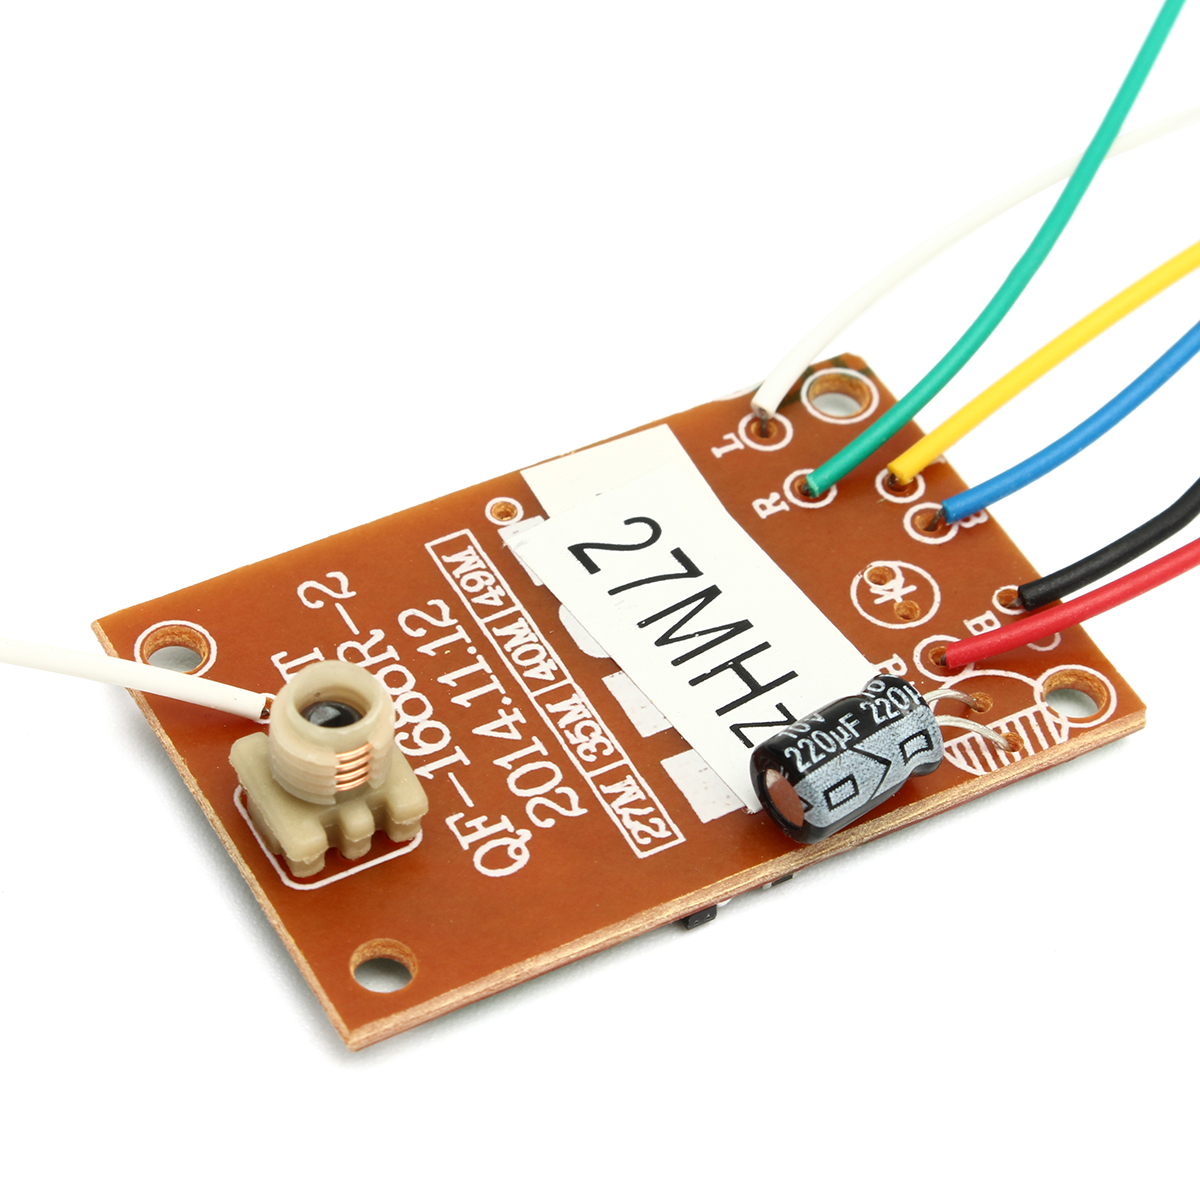 8-Buttons-27MHZ-4CH-Remote-Control-with-Receiver-Board-Antenna-For-DIY-SN-RM9-1287932